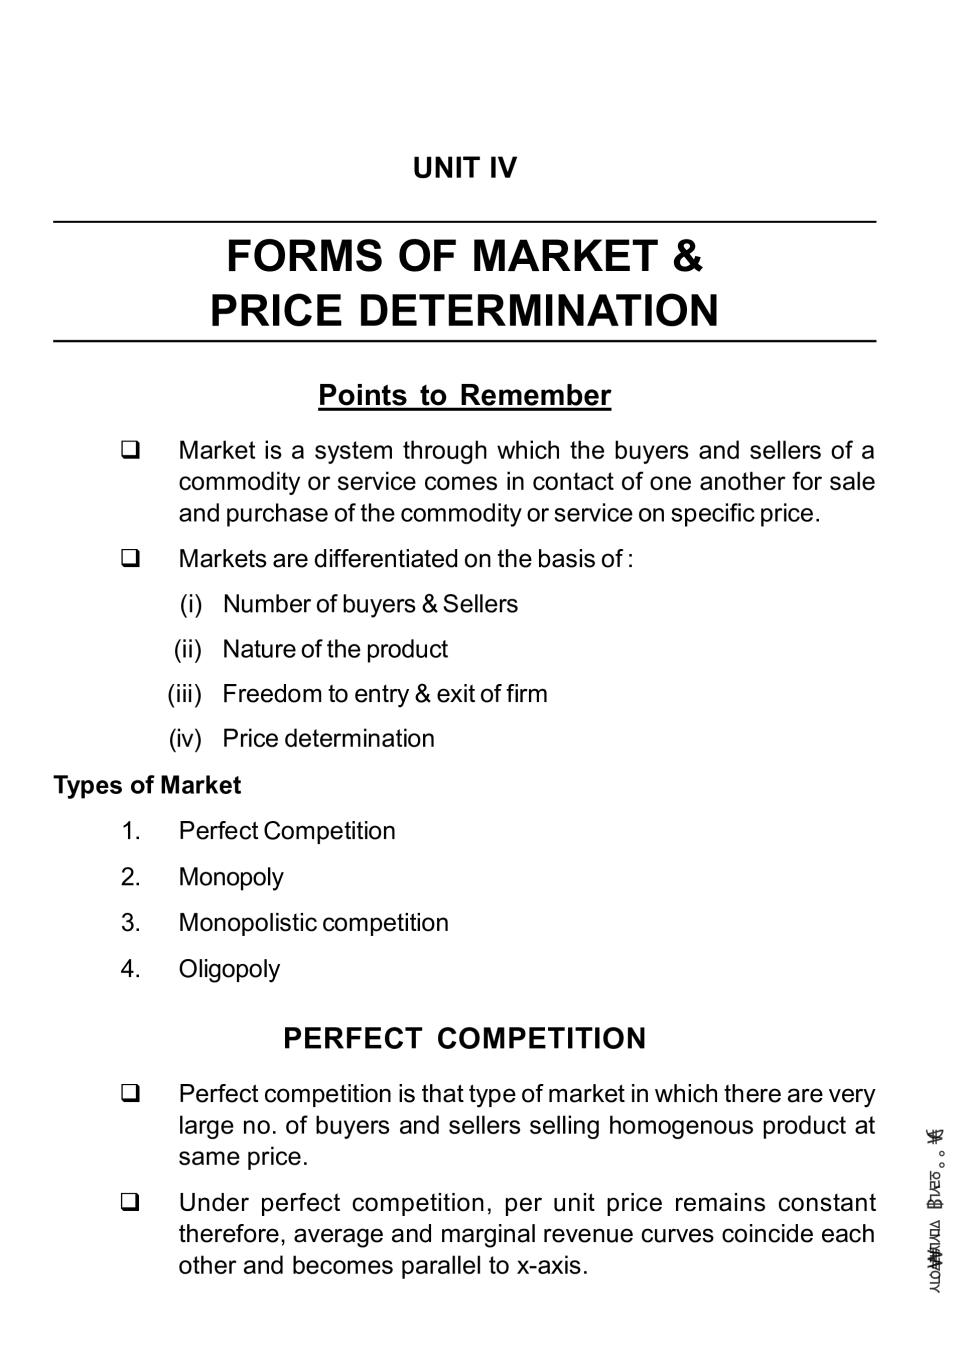 price determination under perfect competition notes